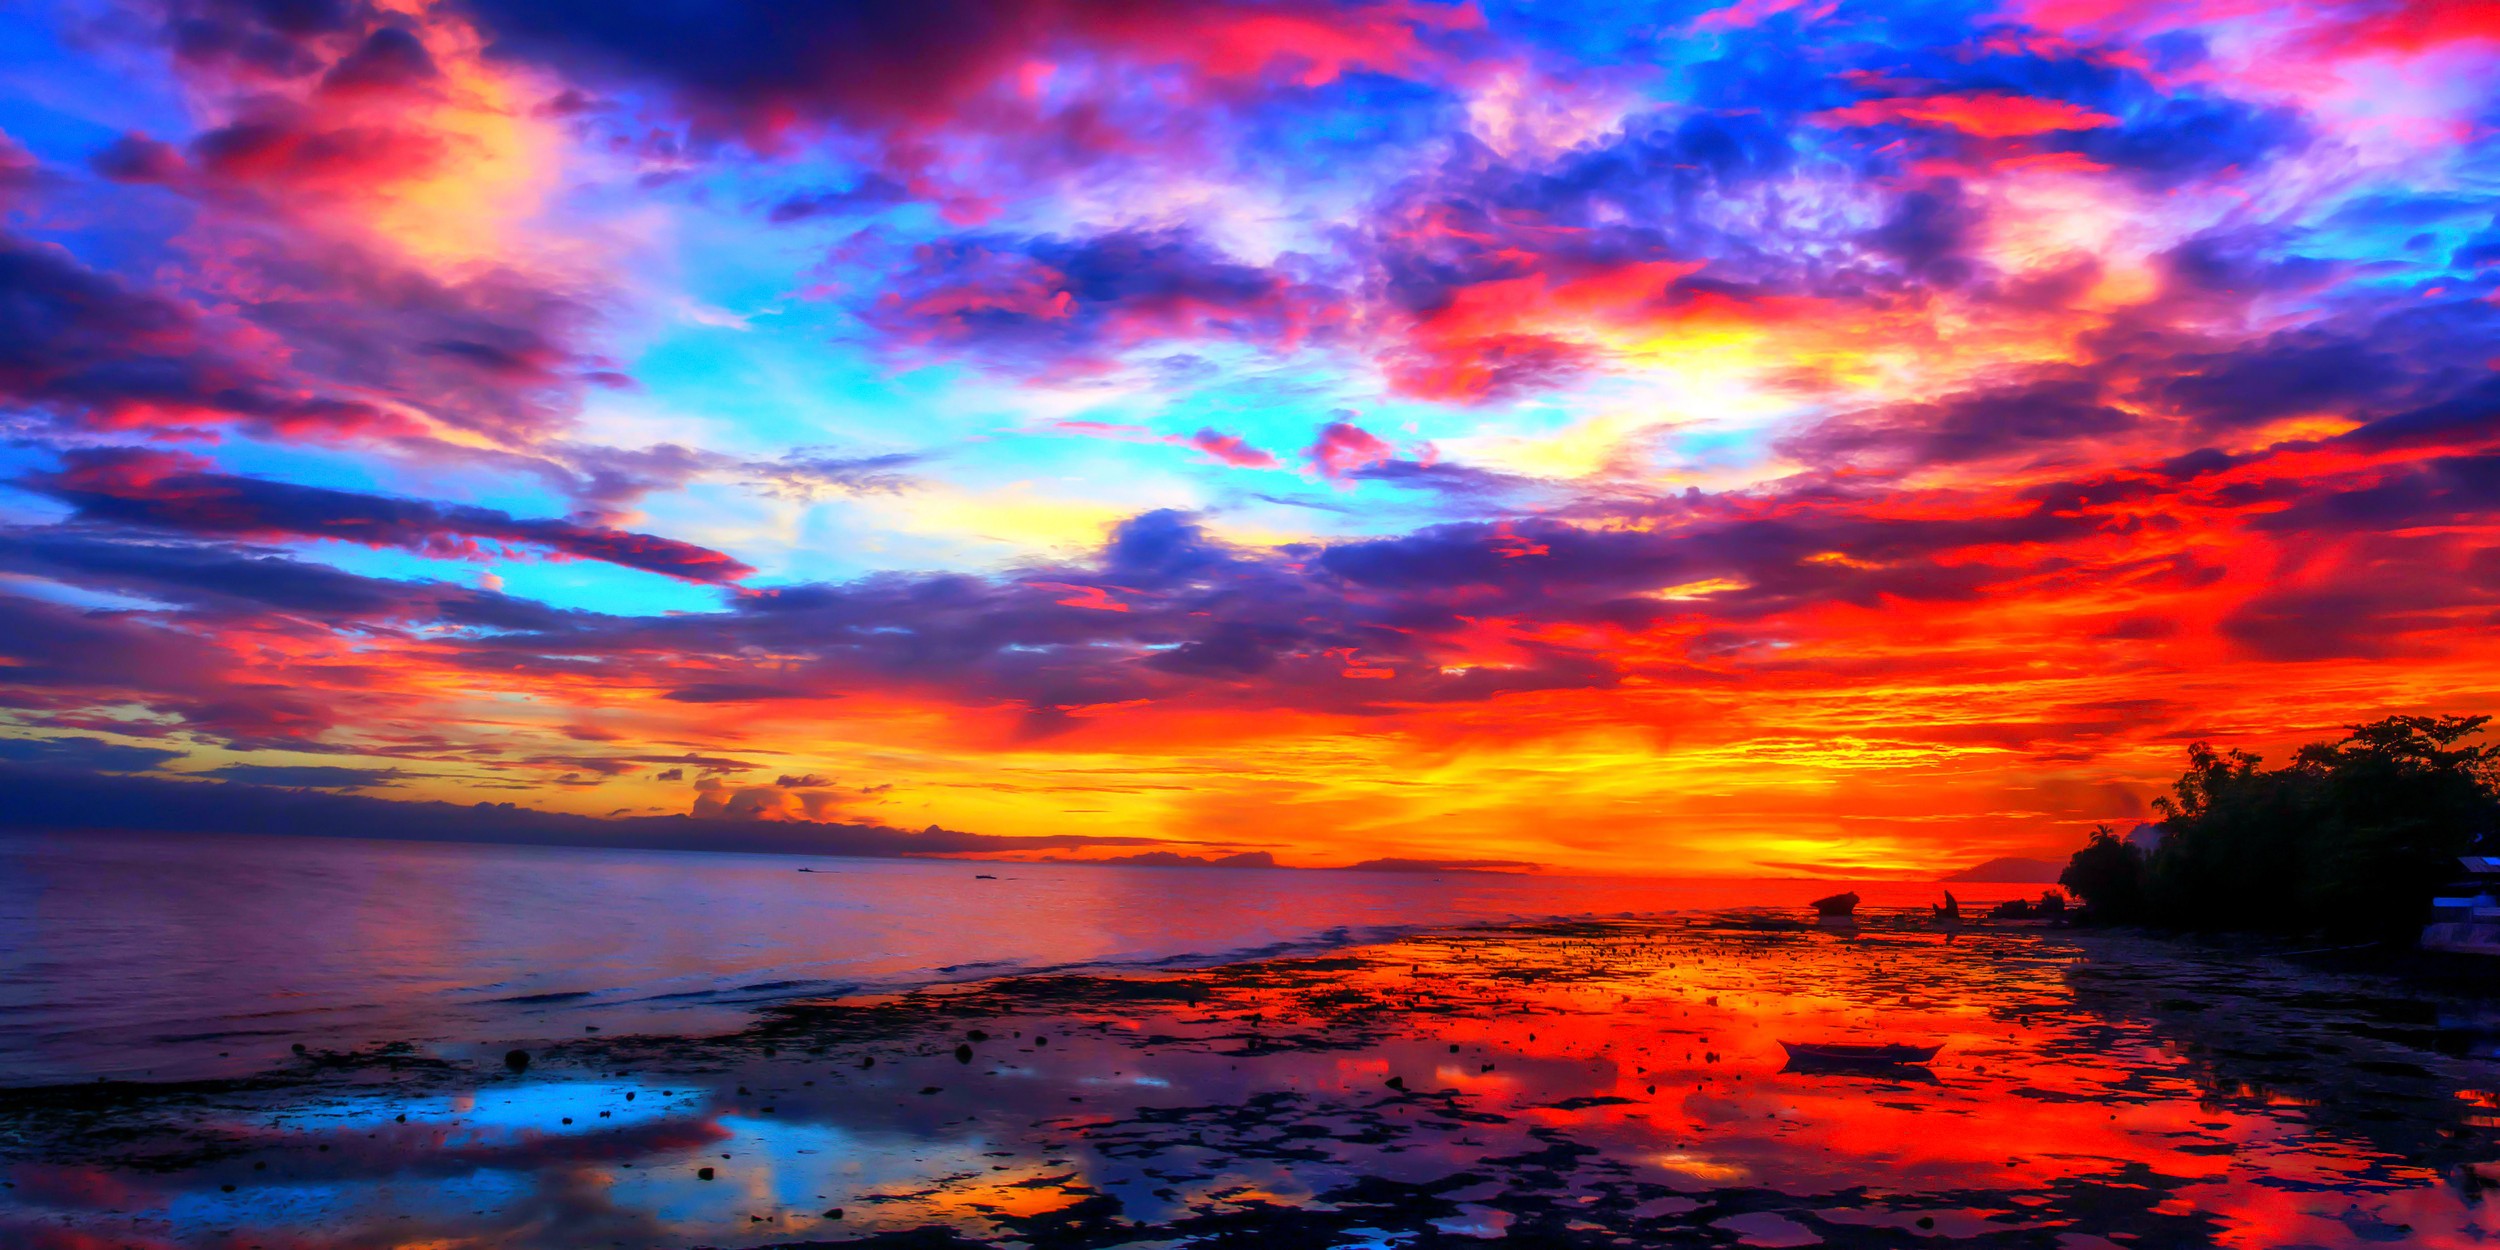 Sunsets: Fiery Sunset Colorful Skies Ocean Sky Colors Water Nature ...